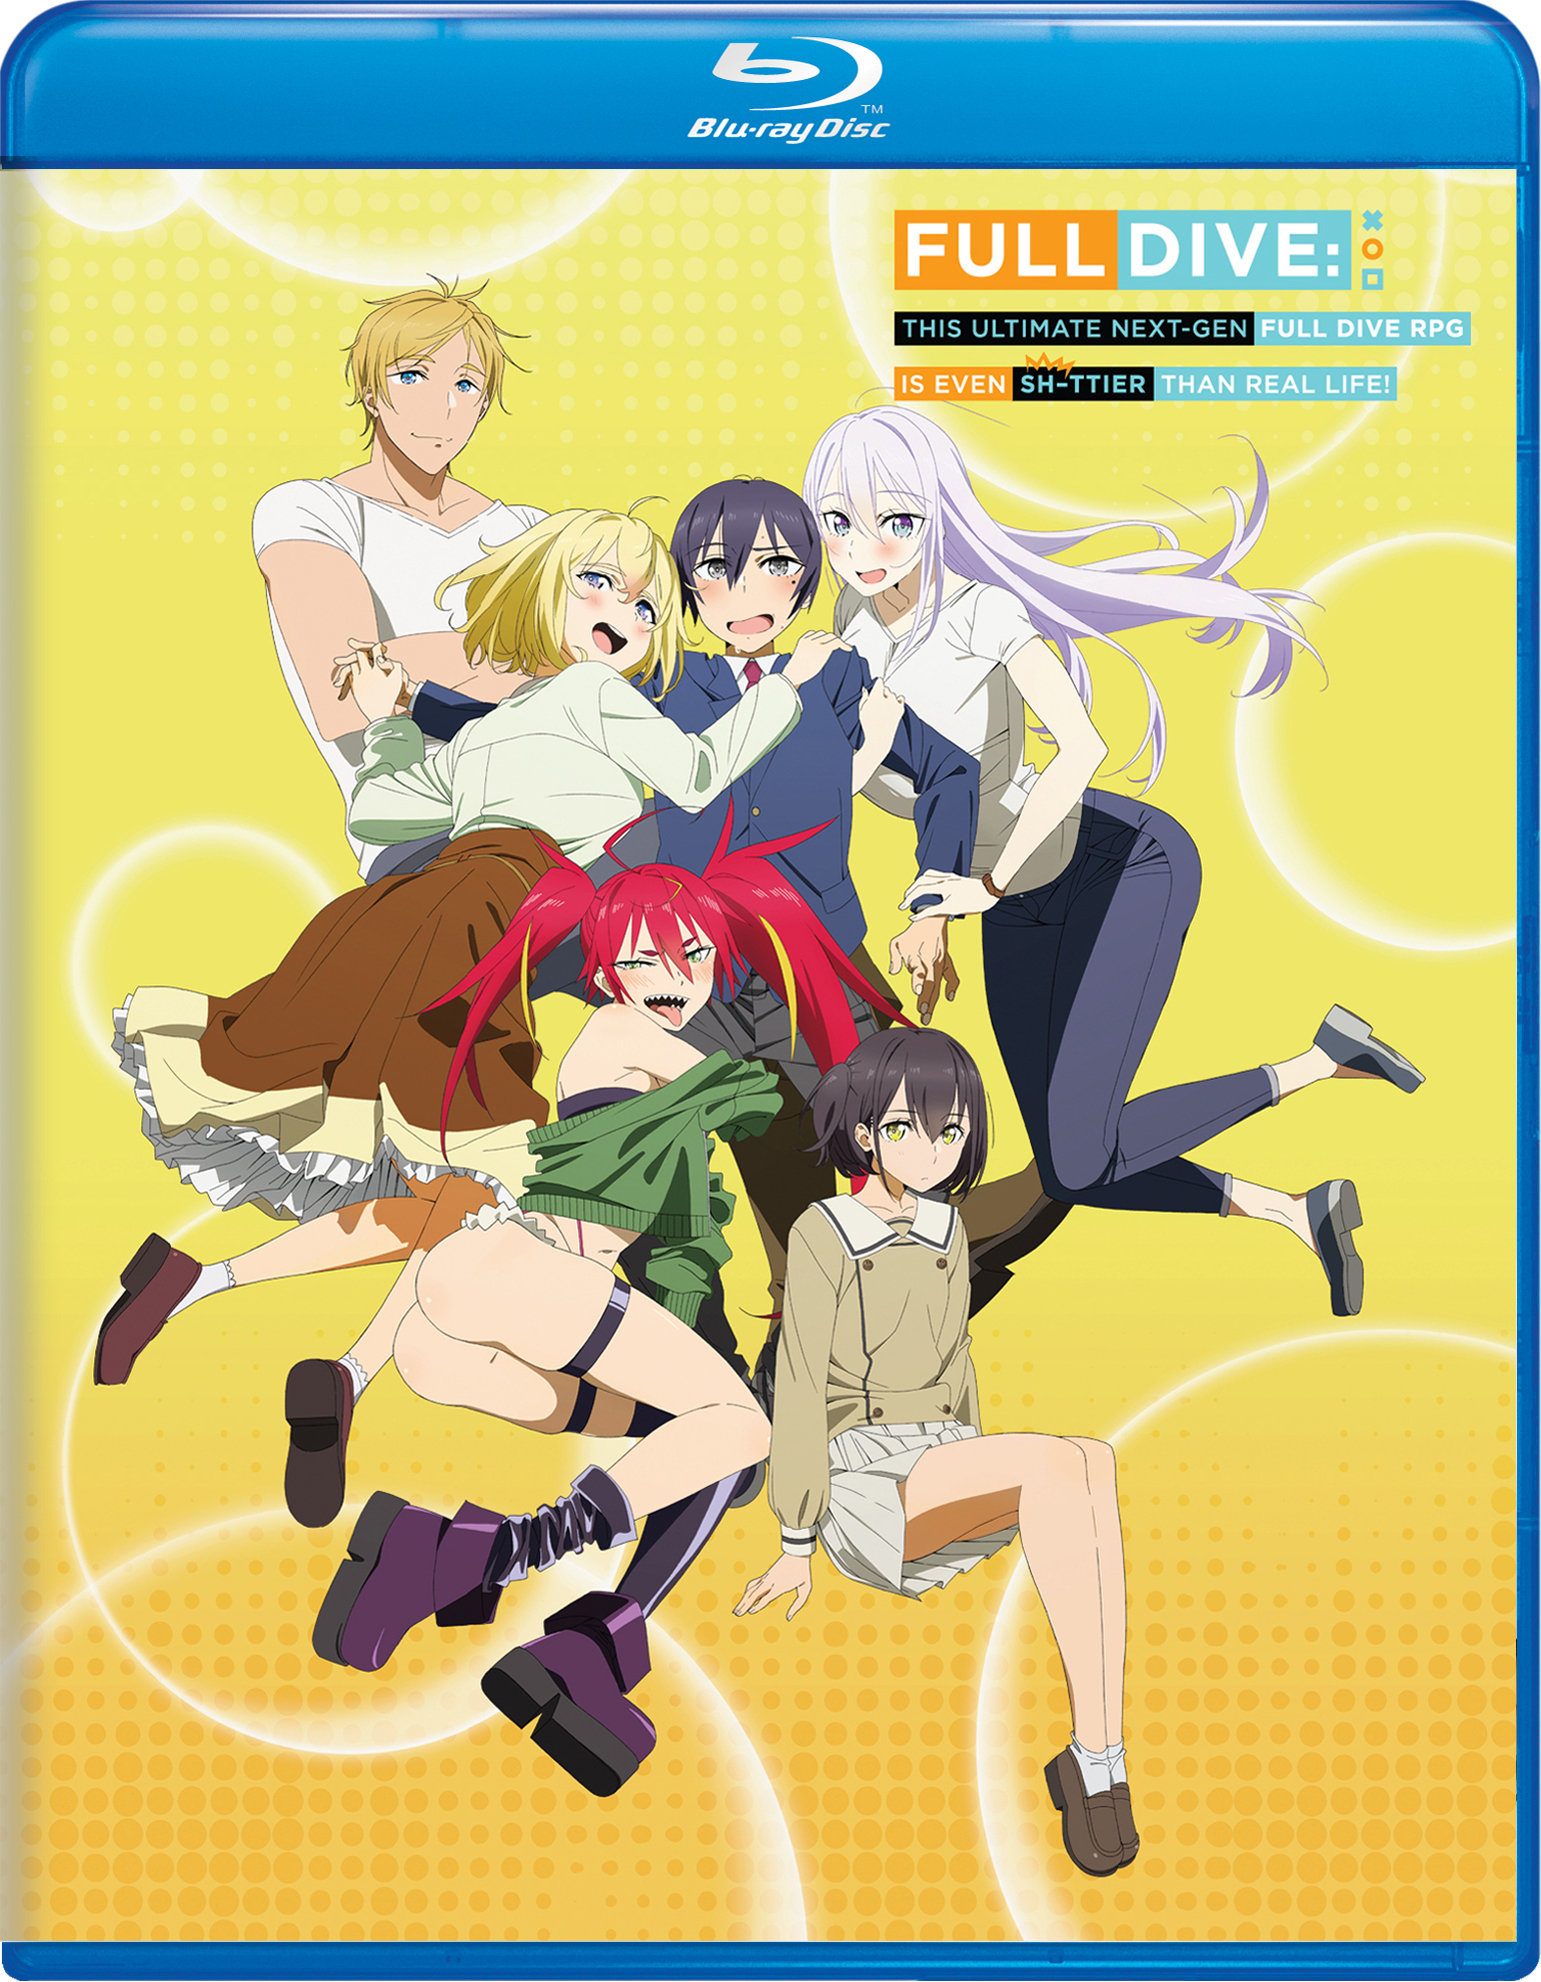 Full Dive: This Ultimate Next-Gen Full Dive RPG Is Even Shittier than Real  Life!: Complete Season (Blu-ray / DVD Combo) - Fandom Post Forums